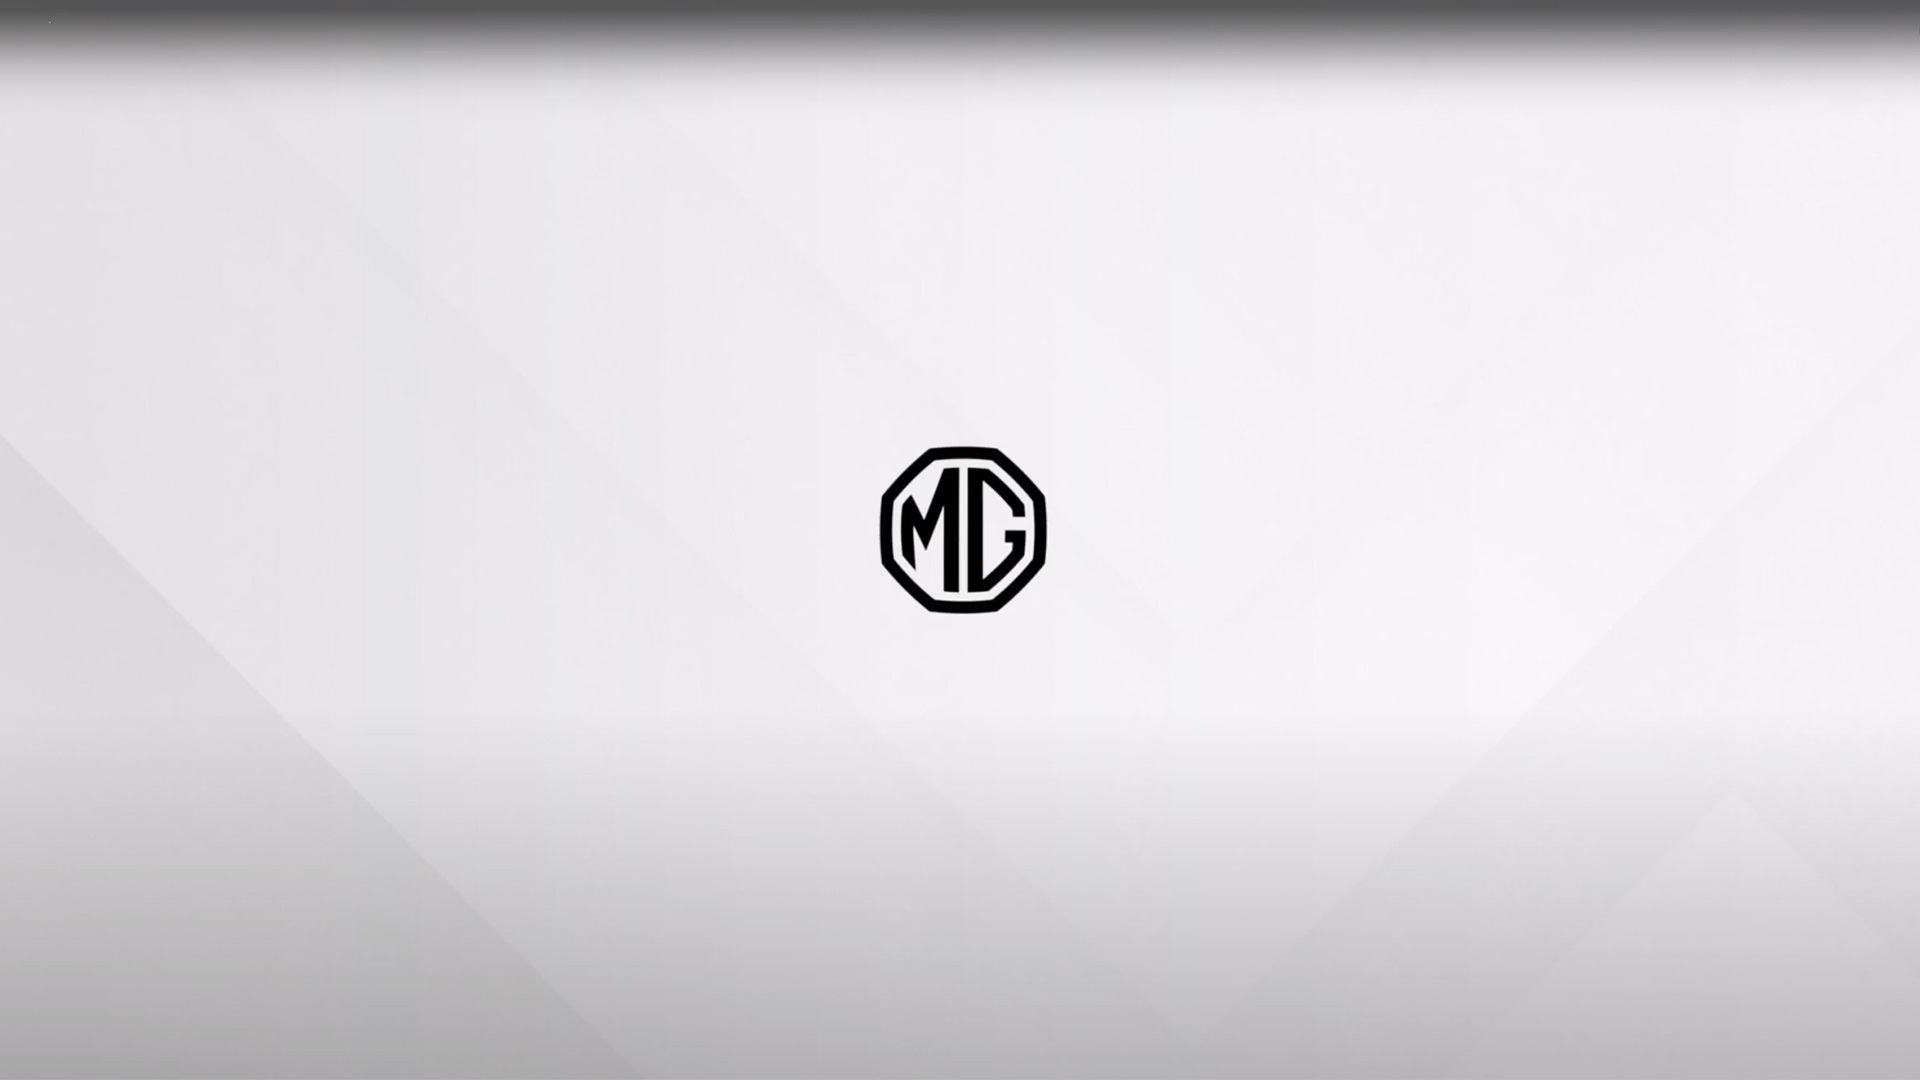 Mg videoposter